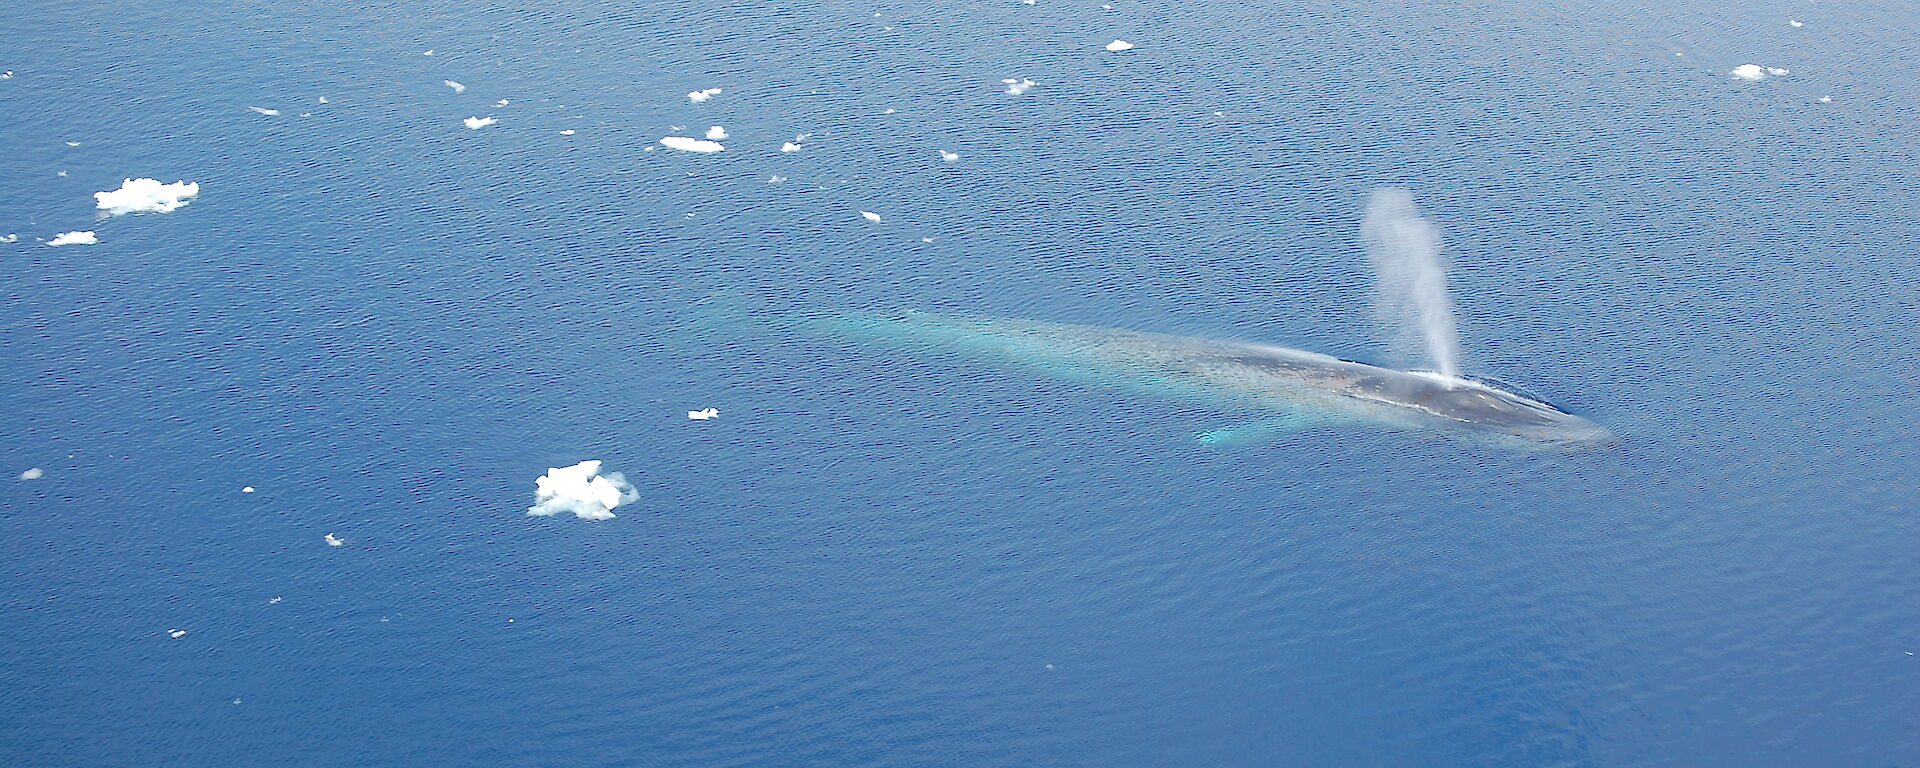 A blue whale surrounded by bergy bits in the ocean.